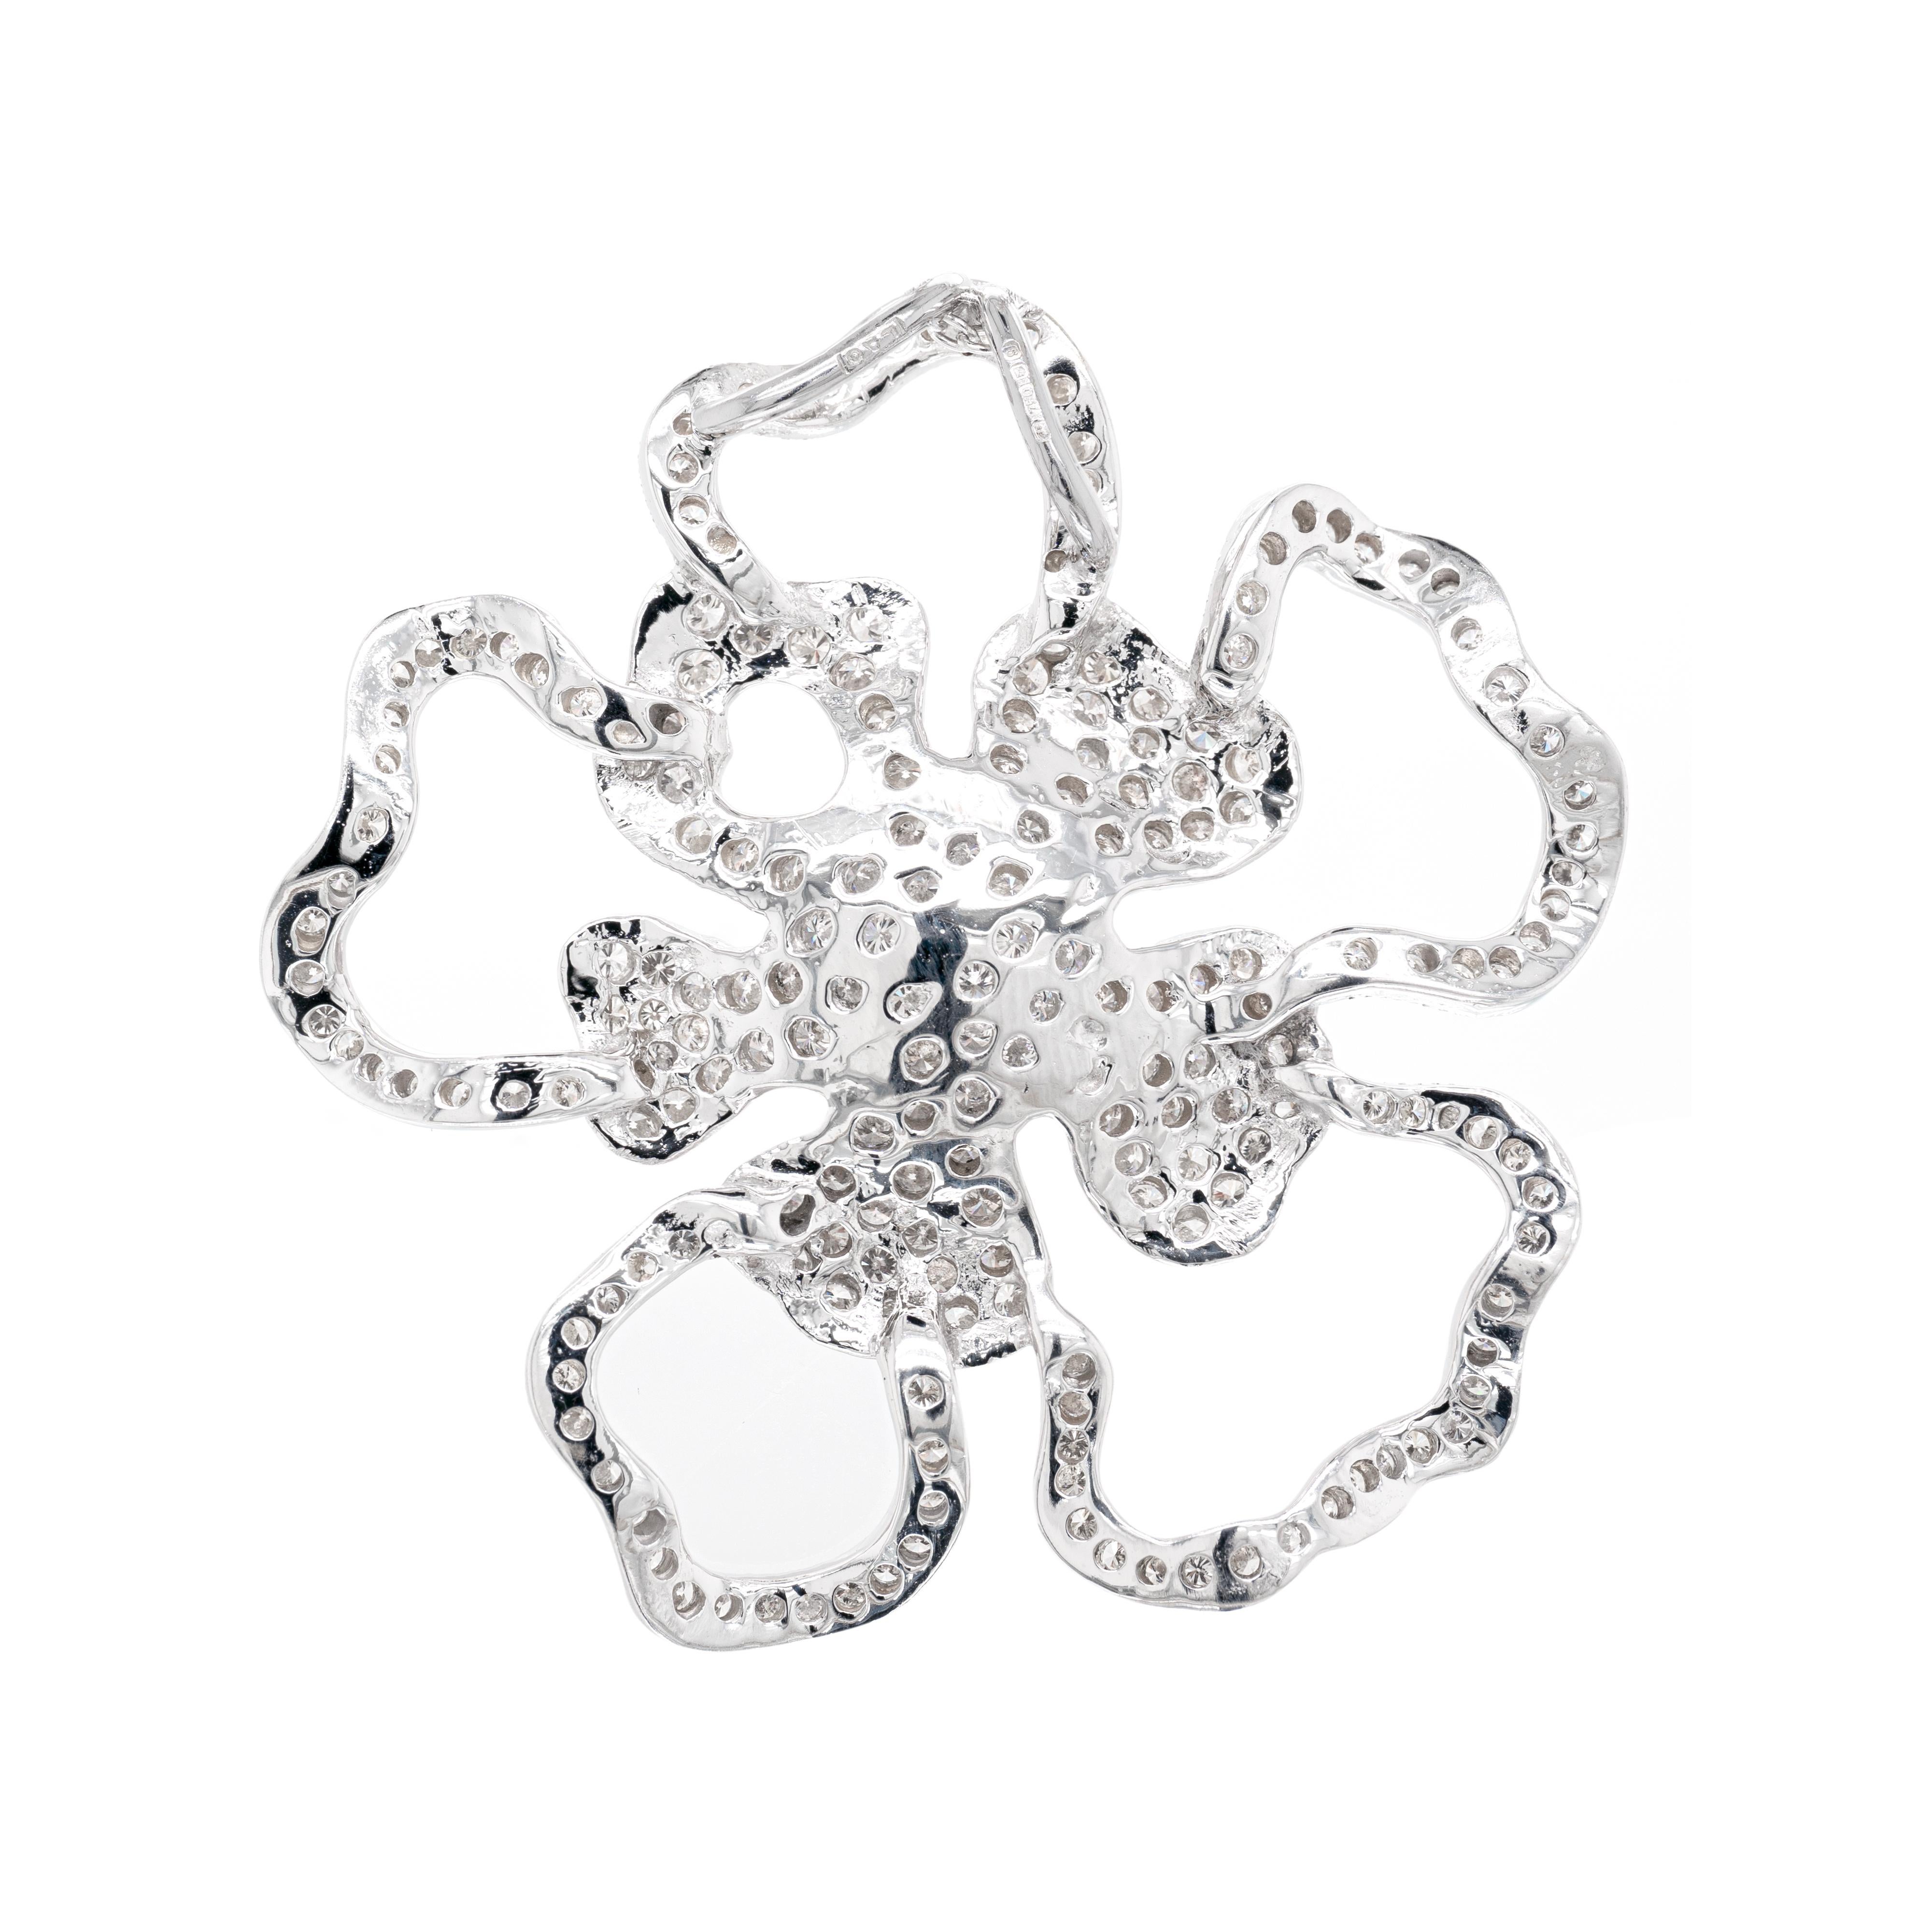 This stunning 18 carat white gold pendant is beautifully design as an open work flower, whose petals are meticulously inlaid with fine quality round brilliant cut diamonds. The flower's outer petals are made just as an outline, while the inner ones